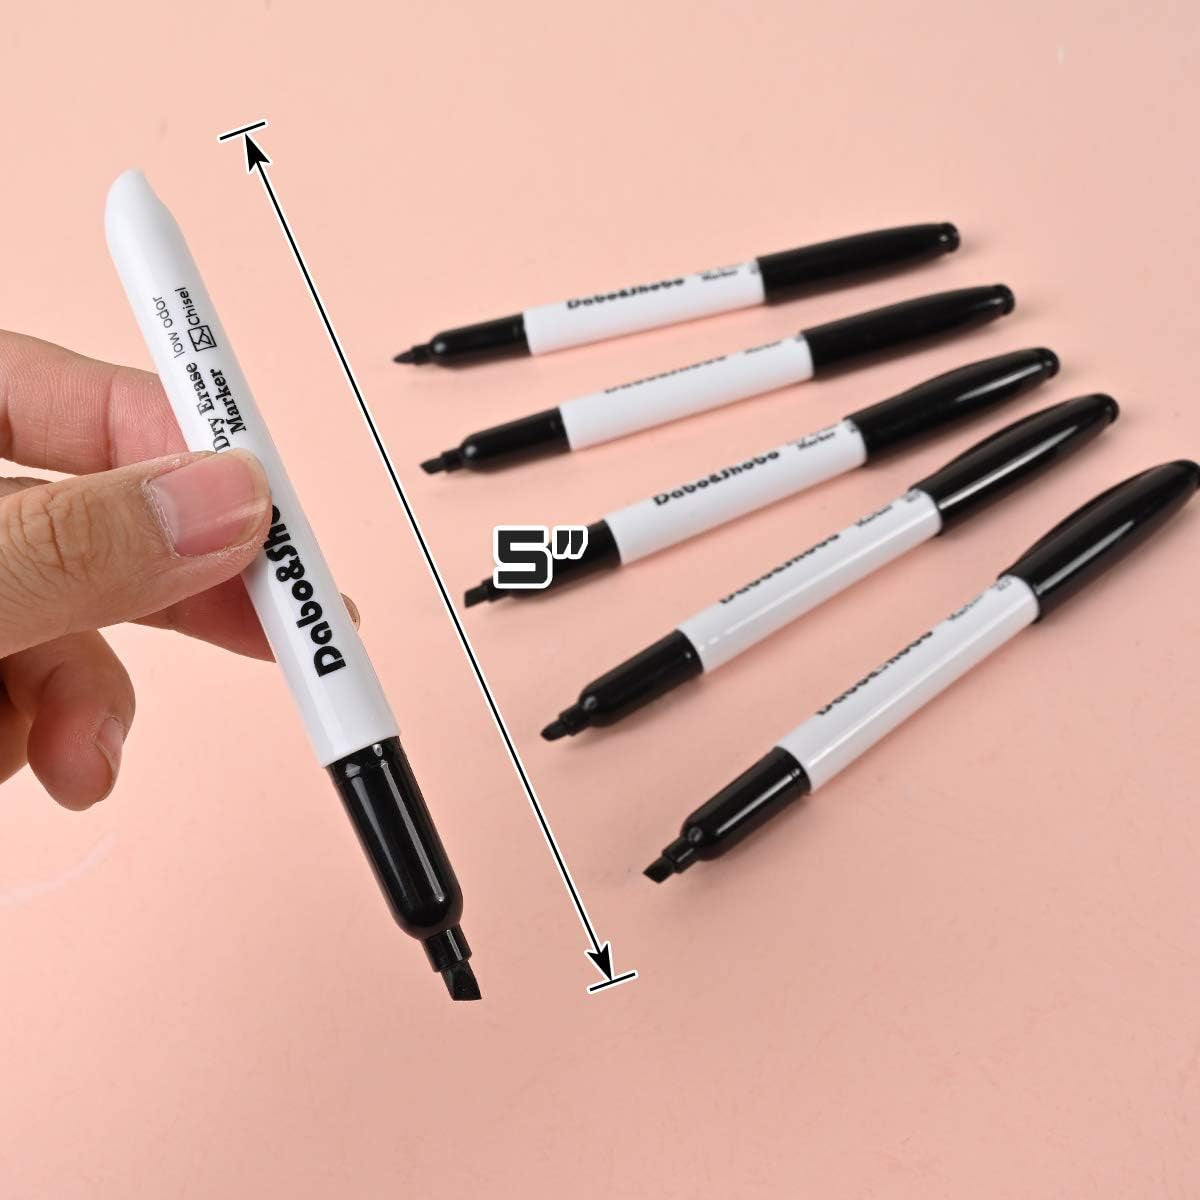 Dry Erase Markers, （80 Count, Black,Chisel Tip）-White Board Markers/Pens ，Very Suitable for Writing on the School、 Office 、Home Dry Erase Whiteboard Mirror Glass…